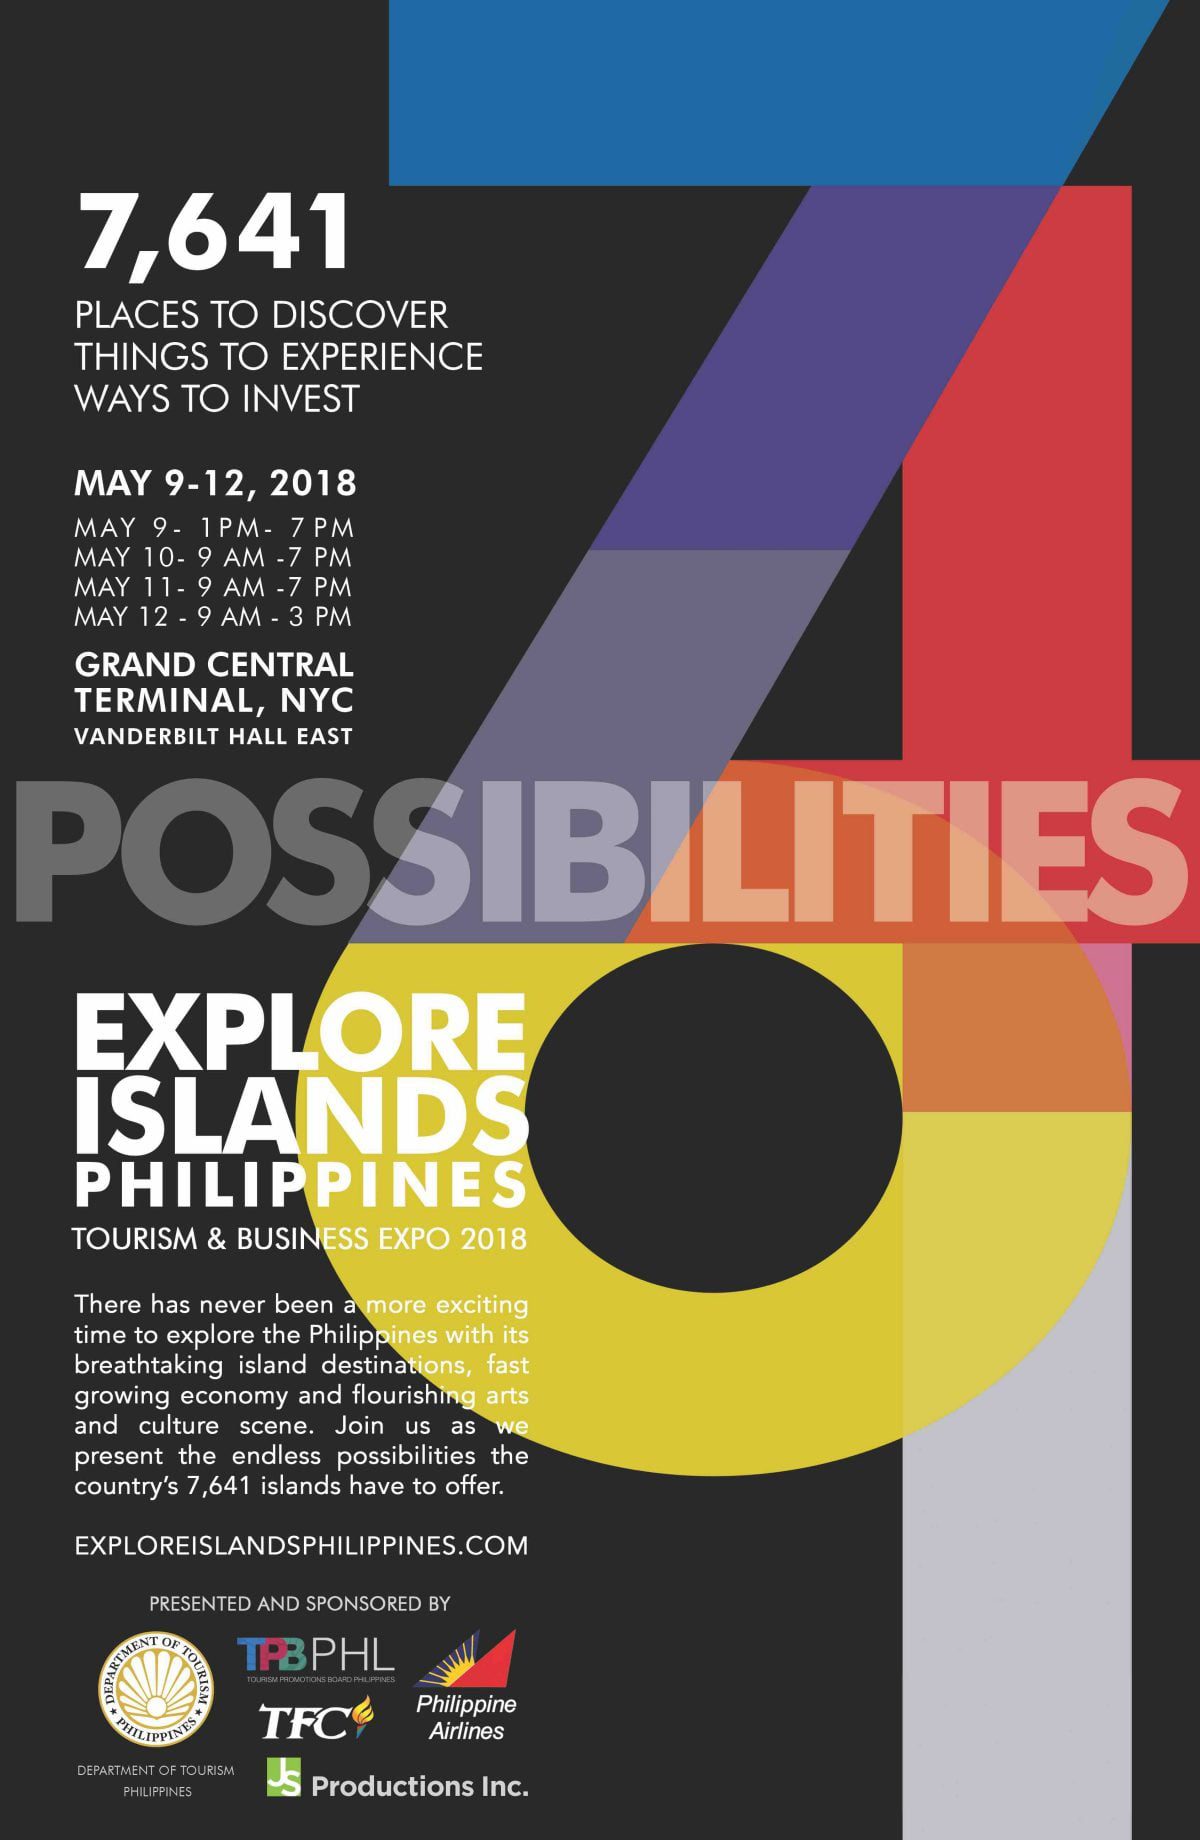 Explore Islands Philippines Business and Tourism Expo